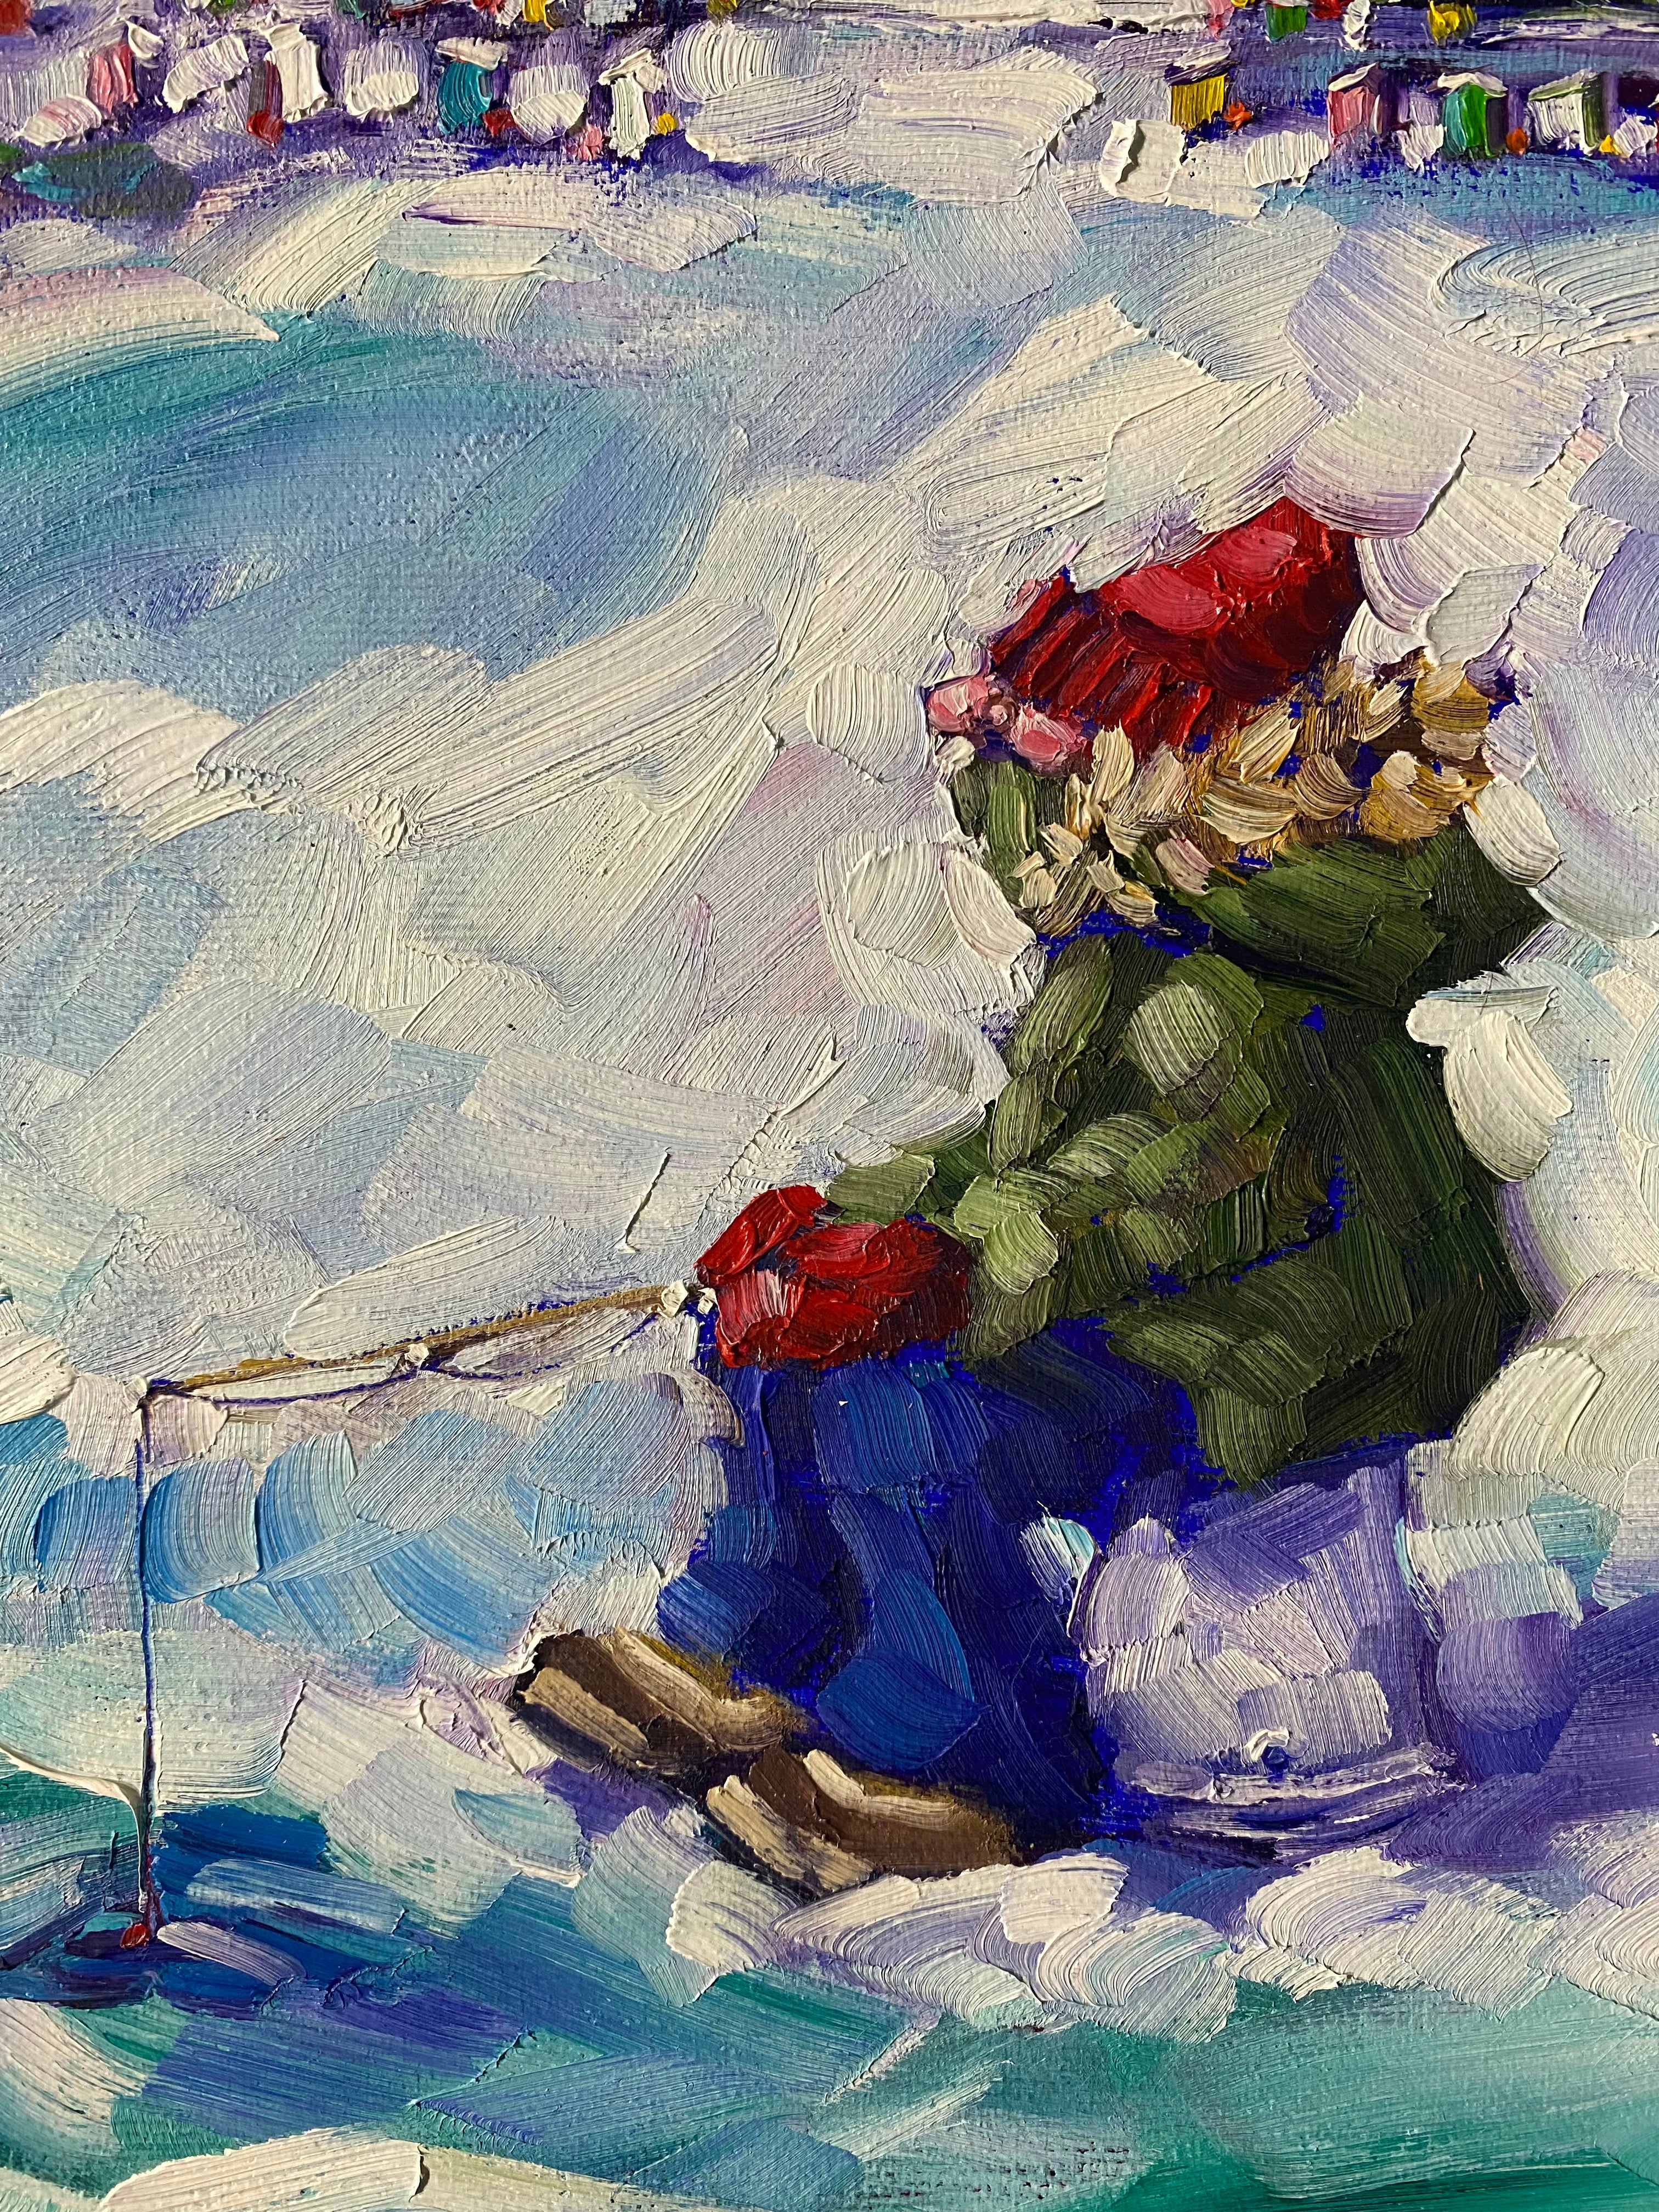 Study II: Reeling in the Cold